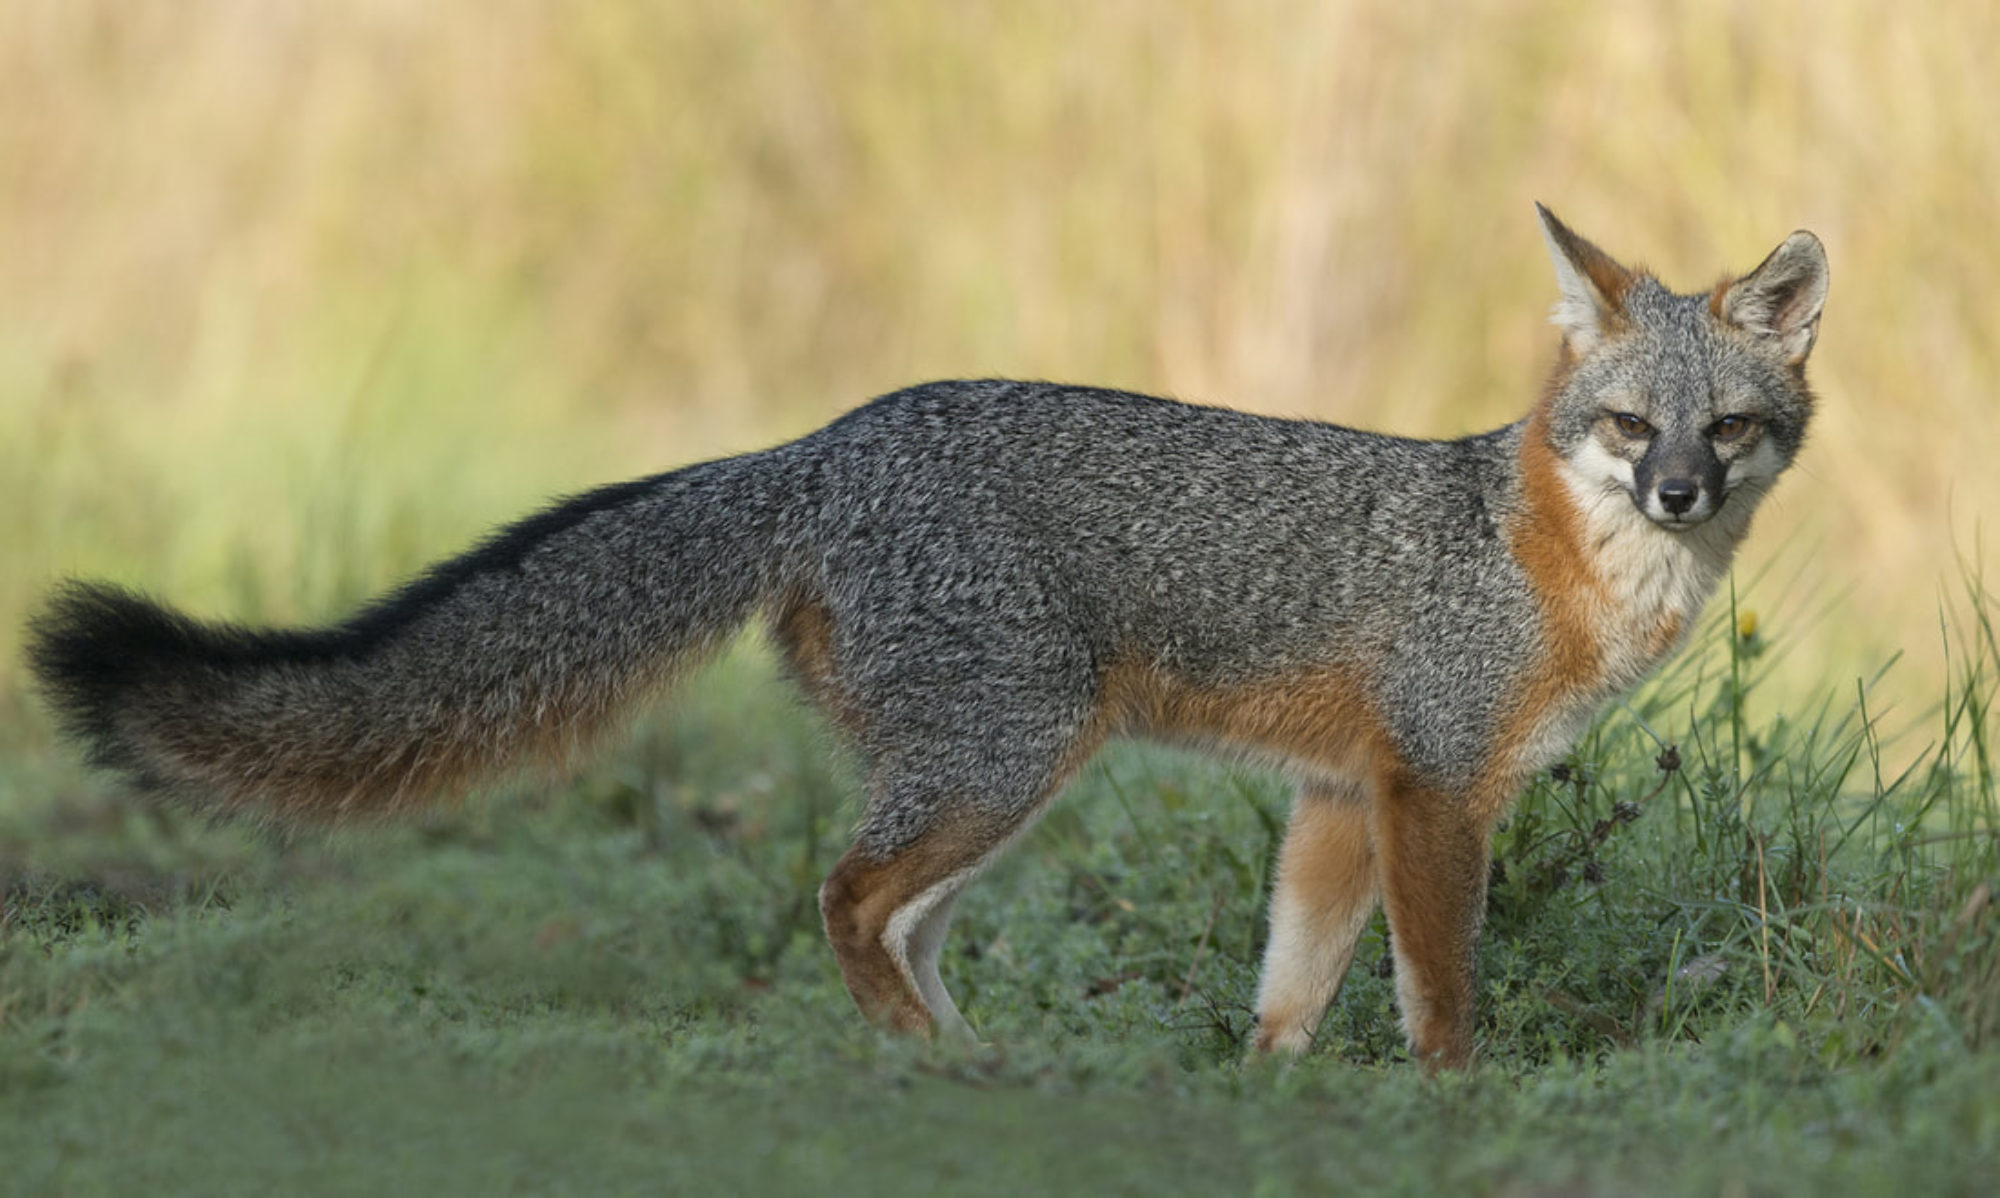 Gray Fox: A distinct black stripe on the top and a tip of black, The tail about one-third of the body length. 2000x1200 HD Wallpaper.